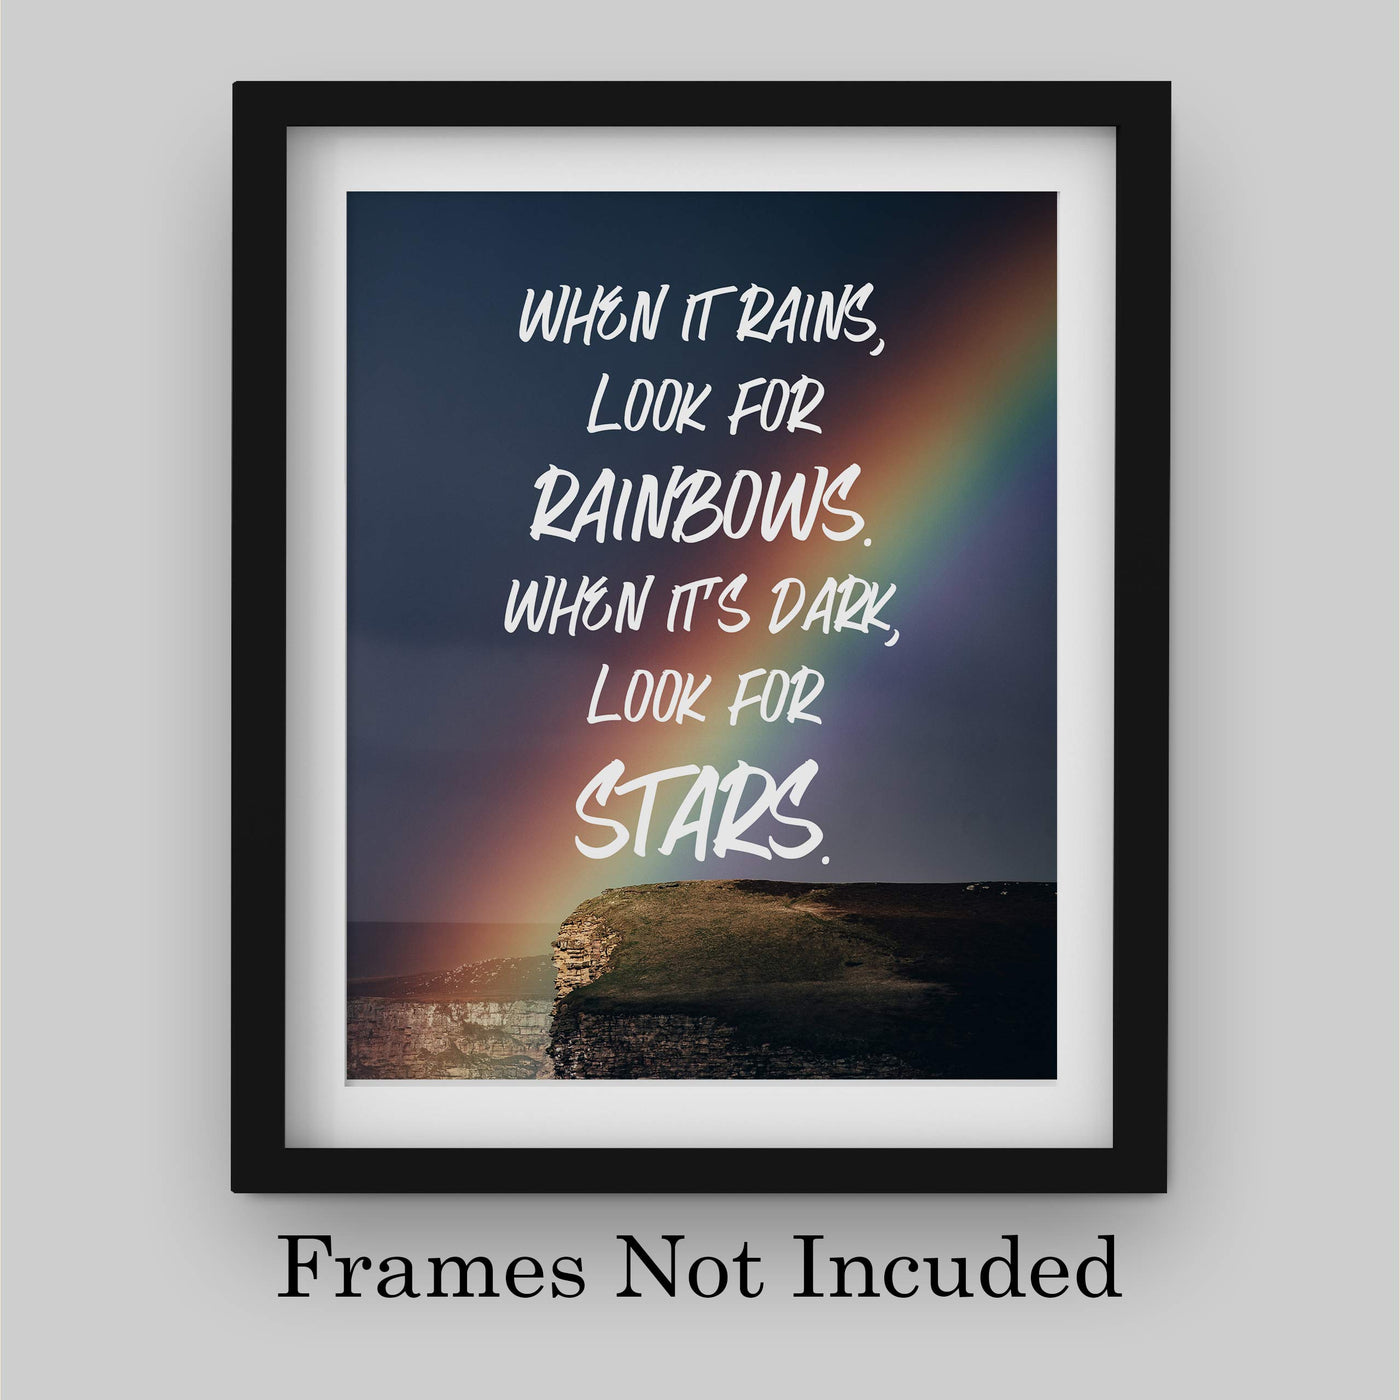 When It Rains, Look For Rainbows Inspirational Quotes Wall Sign -8 x 10" Wall Art Print-Ready to Frame. Modern Typographic Design. Home-Office-Studio-Motivation Decor. Great Positive Advice!